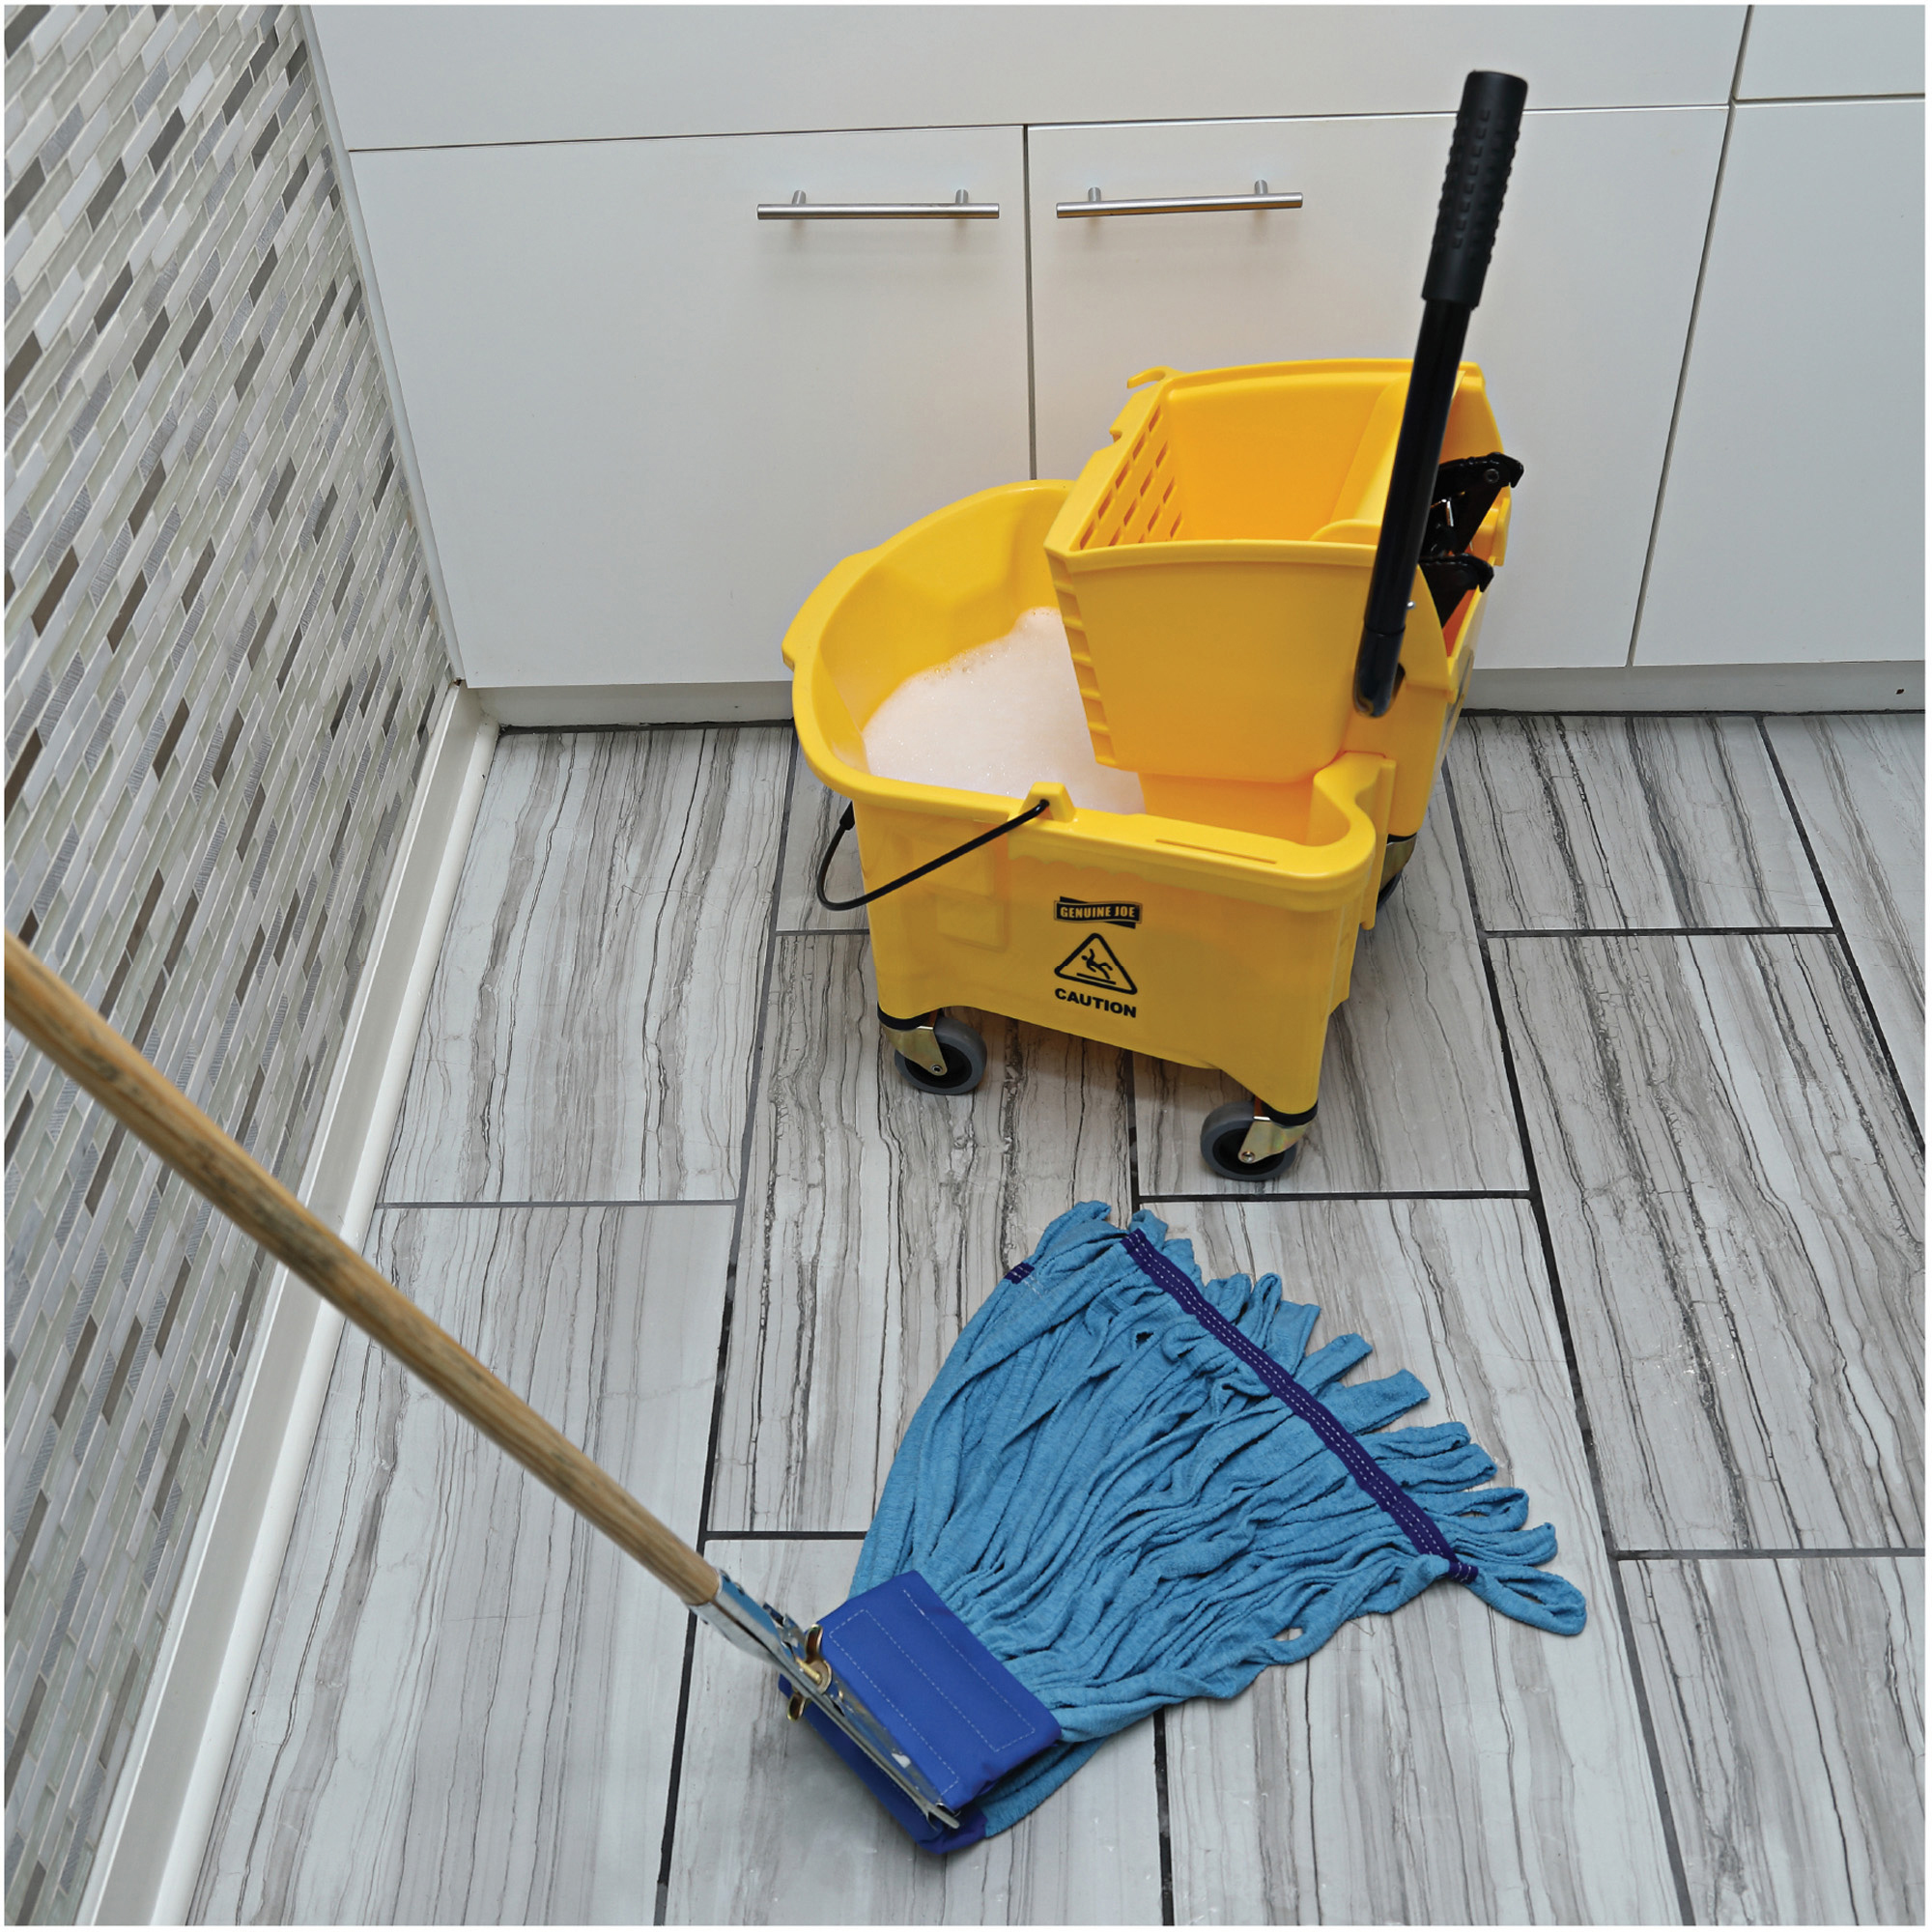 Rubbermaid Commercial Mop Bucket/Wringer Combination - RCP758088YW 